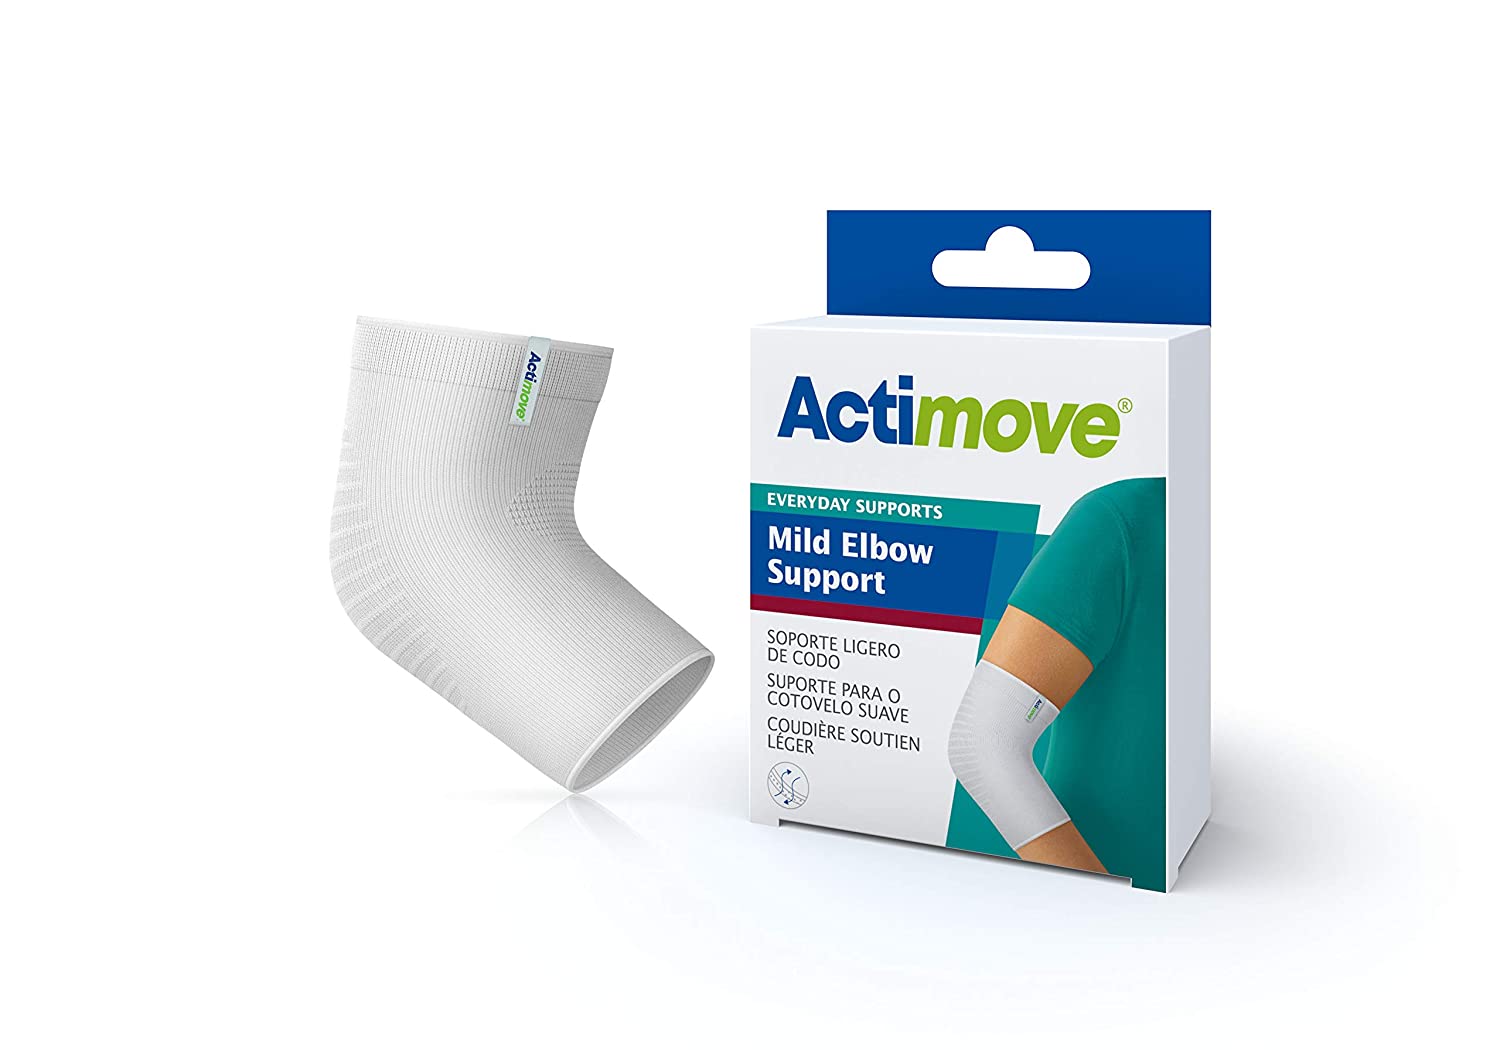 Applies appropriate compression to help relieve strain, viscoelastic insert  gently massages elbow.